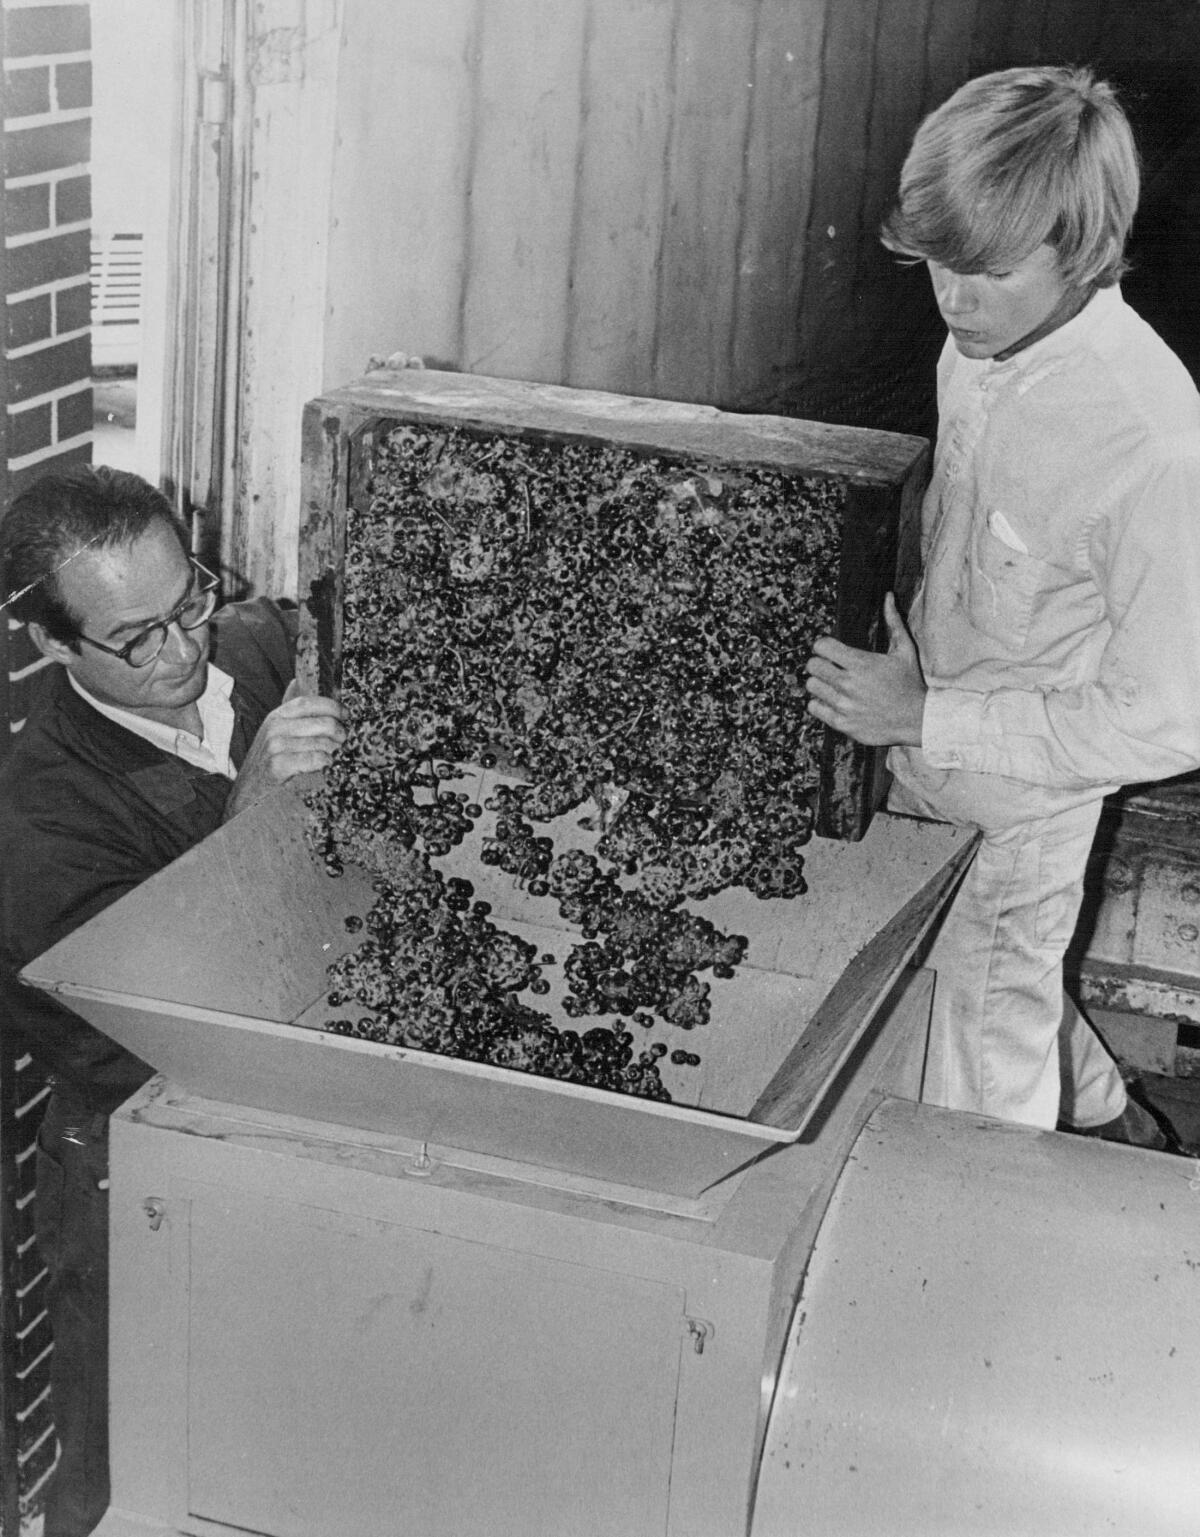 Two people pouring grapes into a hopper.